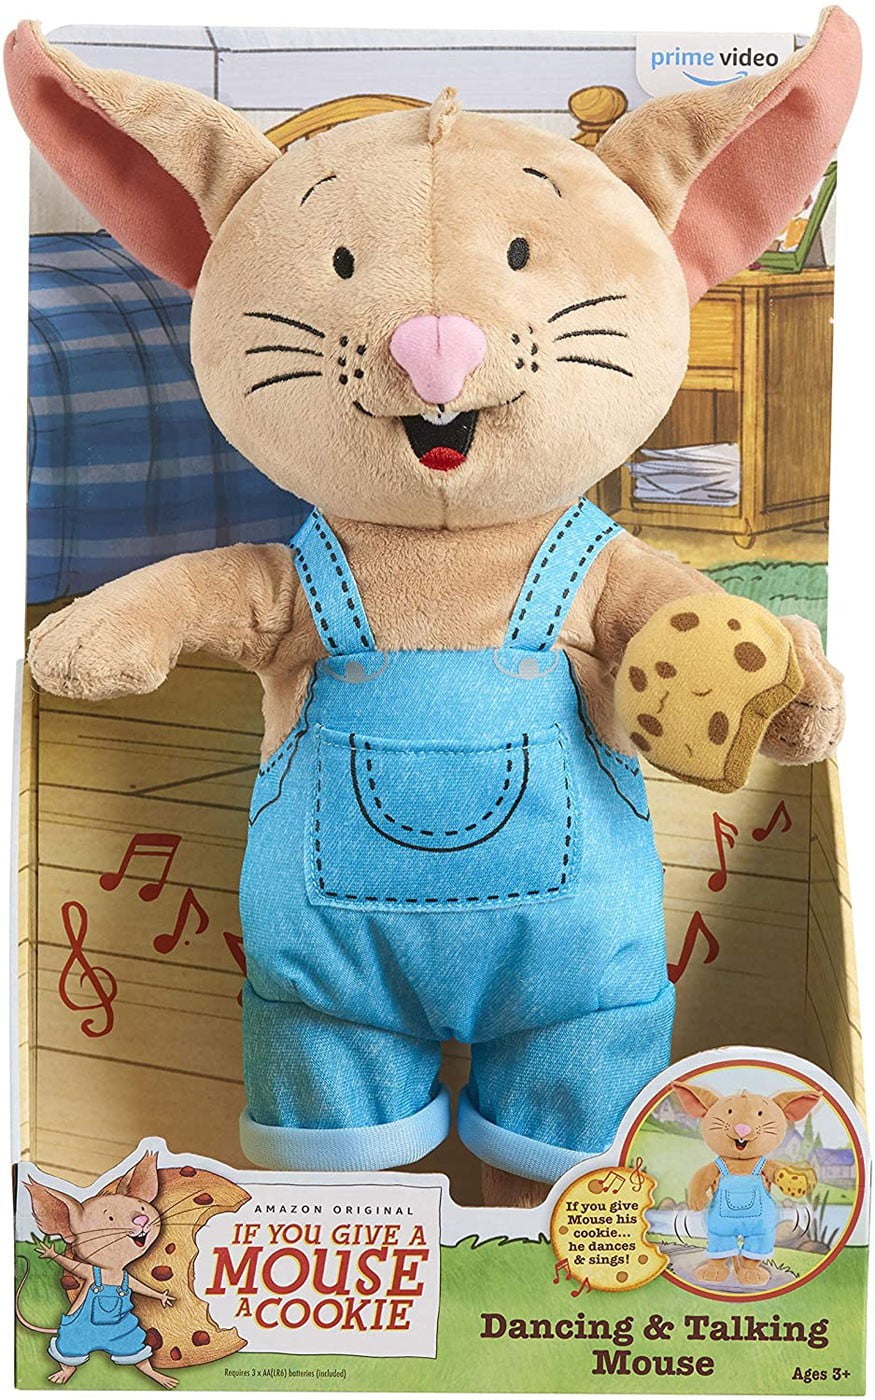 Kohls Cares for Kids If You Give a Mouse Cookie Tan 15” Plush Blue Overalls Gift for sale online 